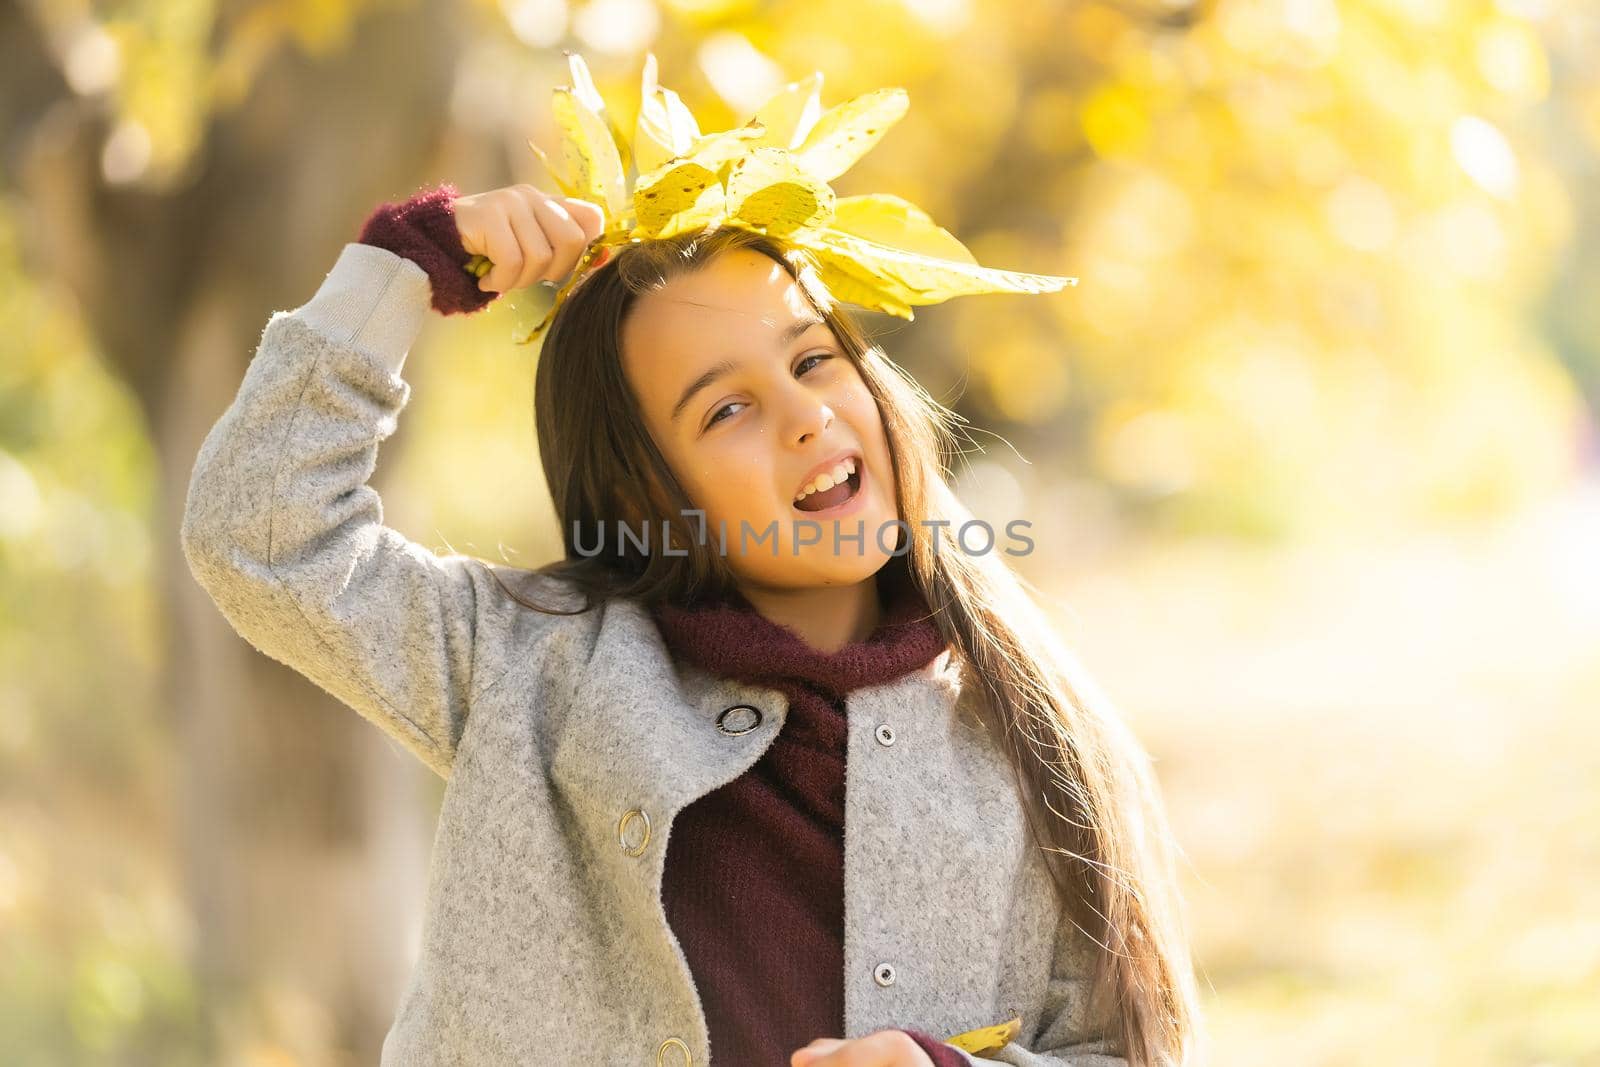 Little girl in a coat at autumn holding leaves.